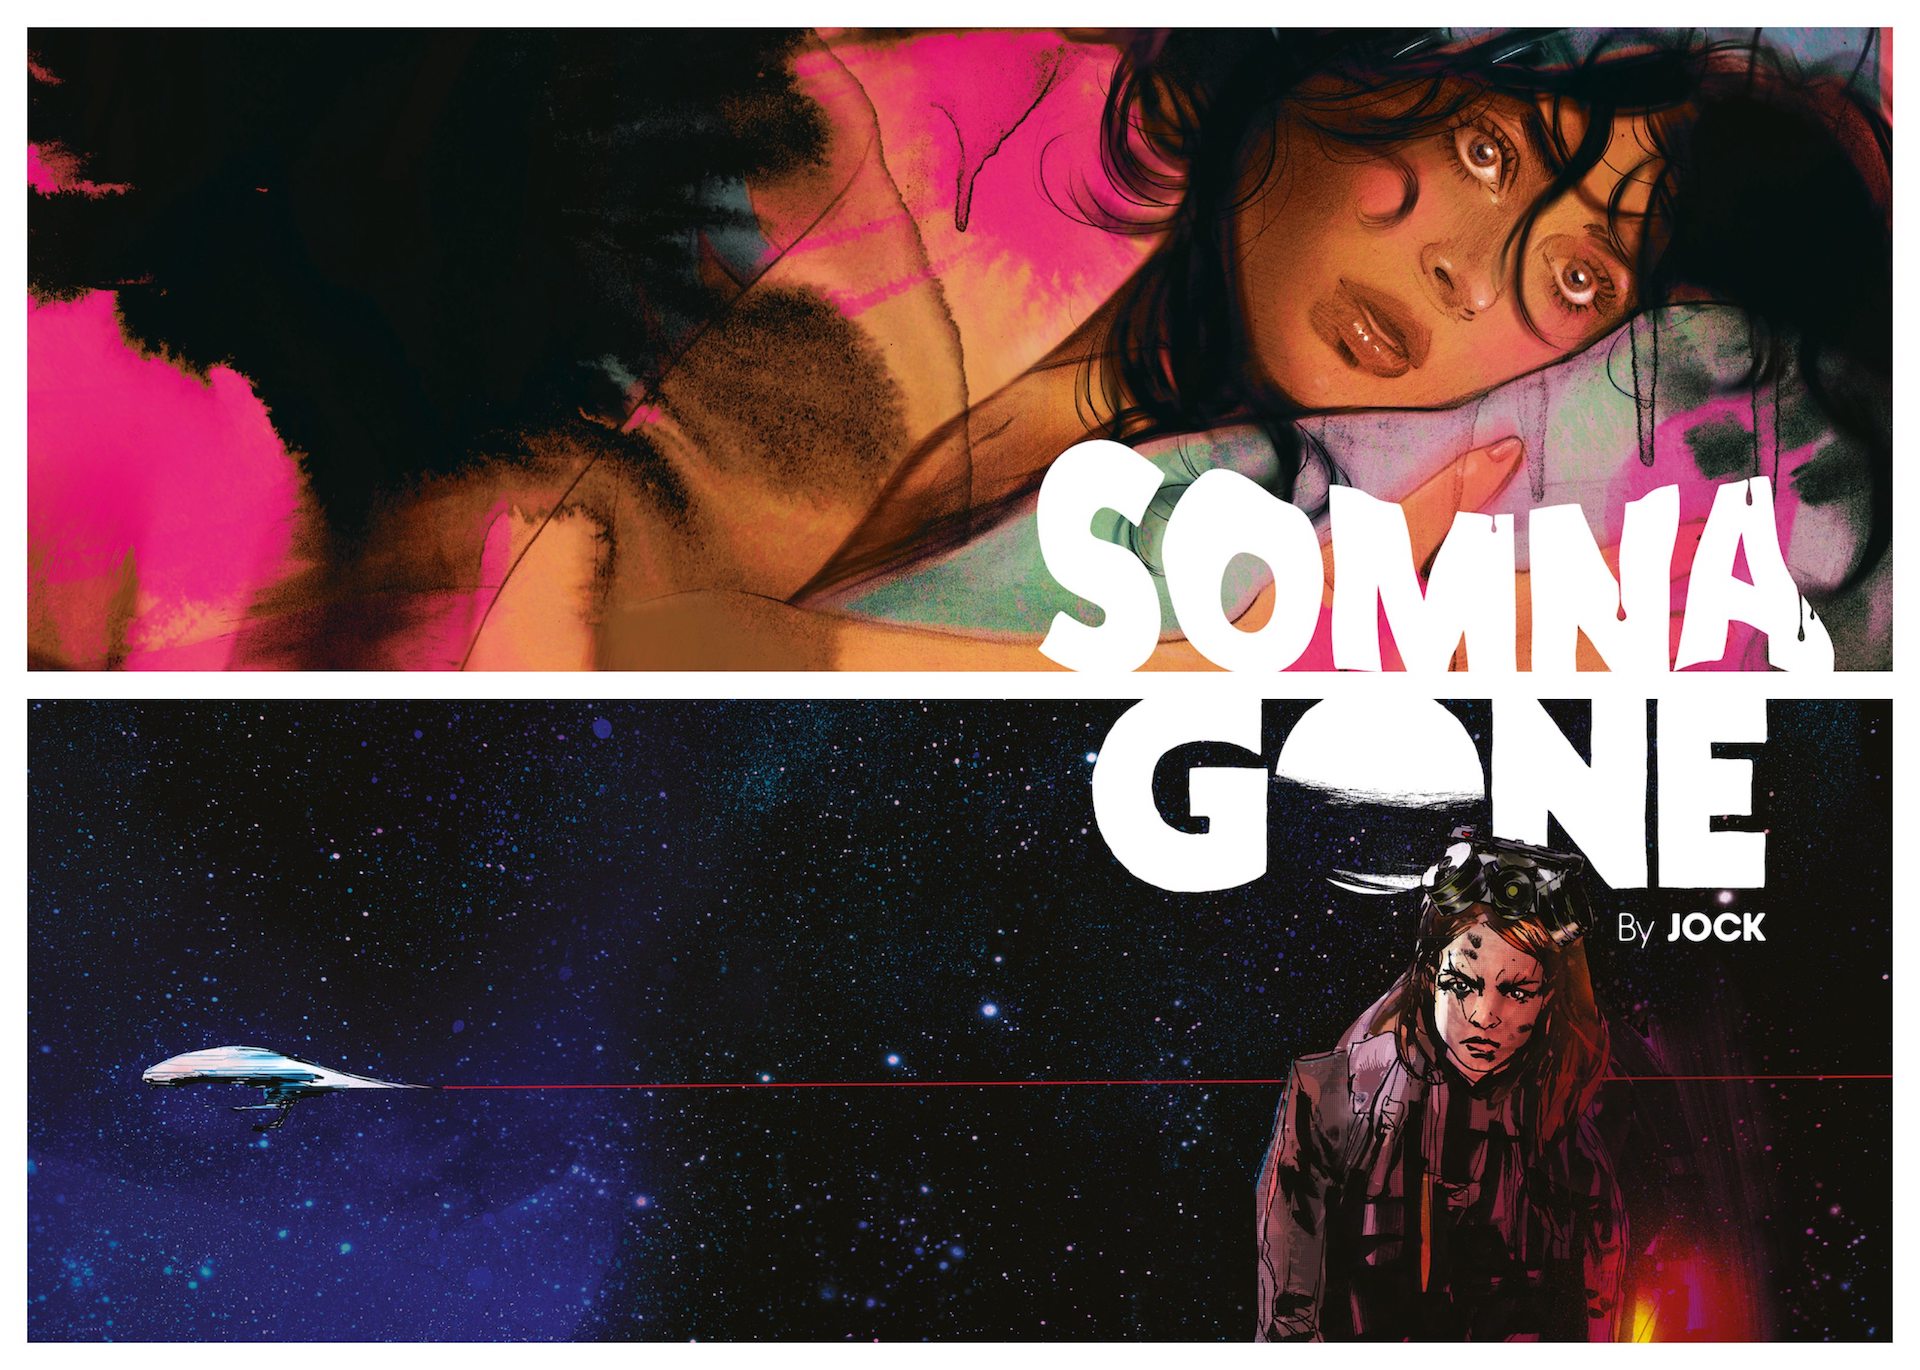 New DSTLRY 'Gone' and 'Somna' #2 covers revealed